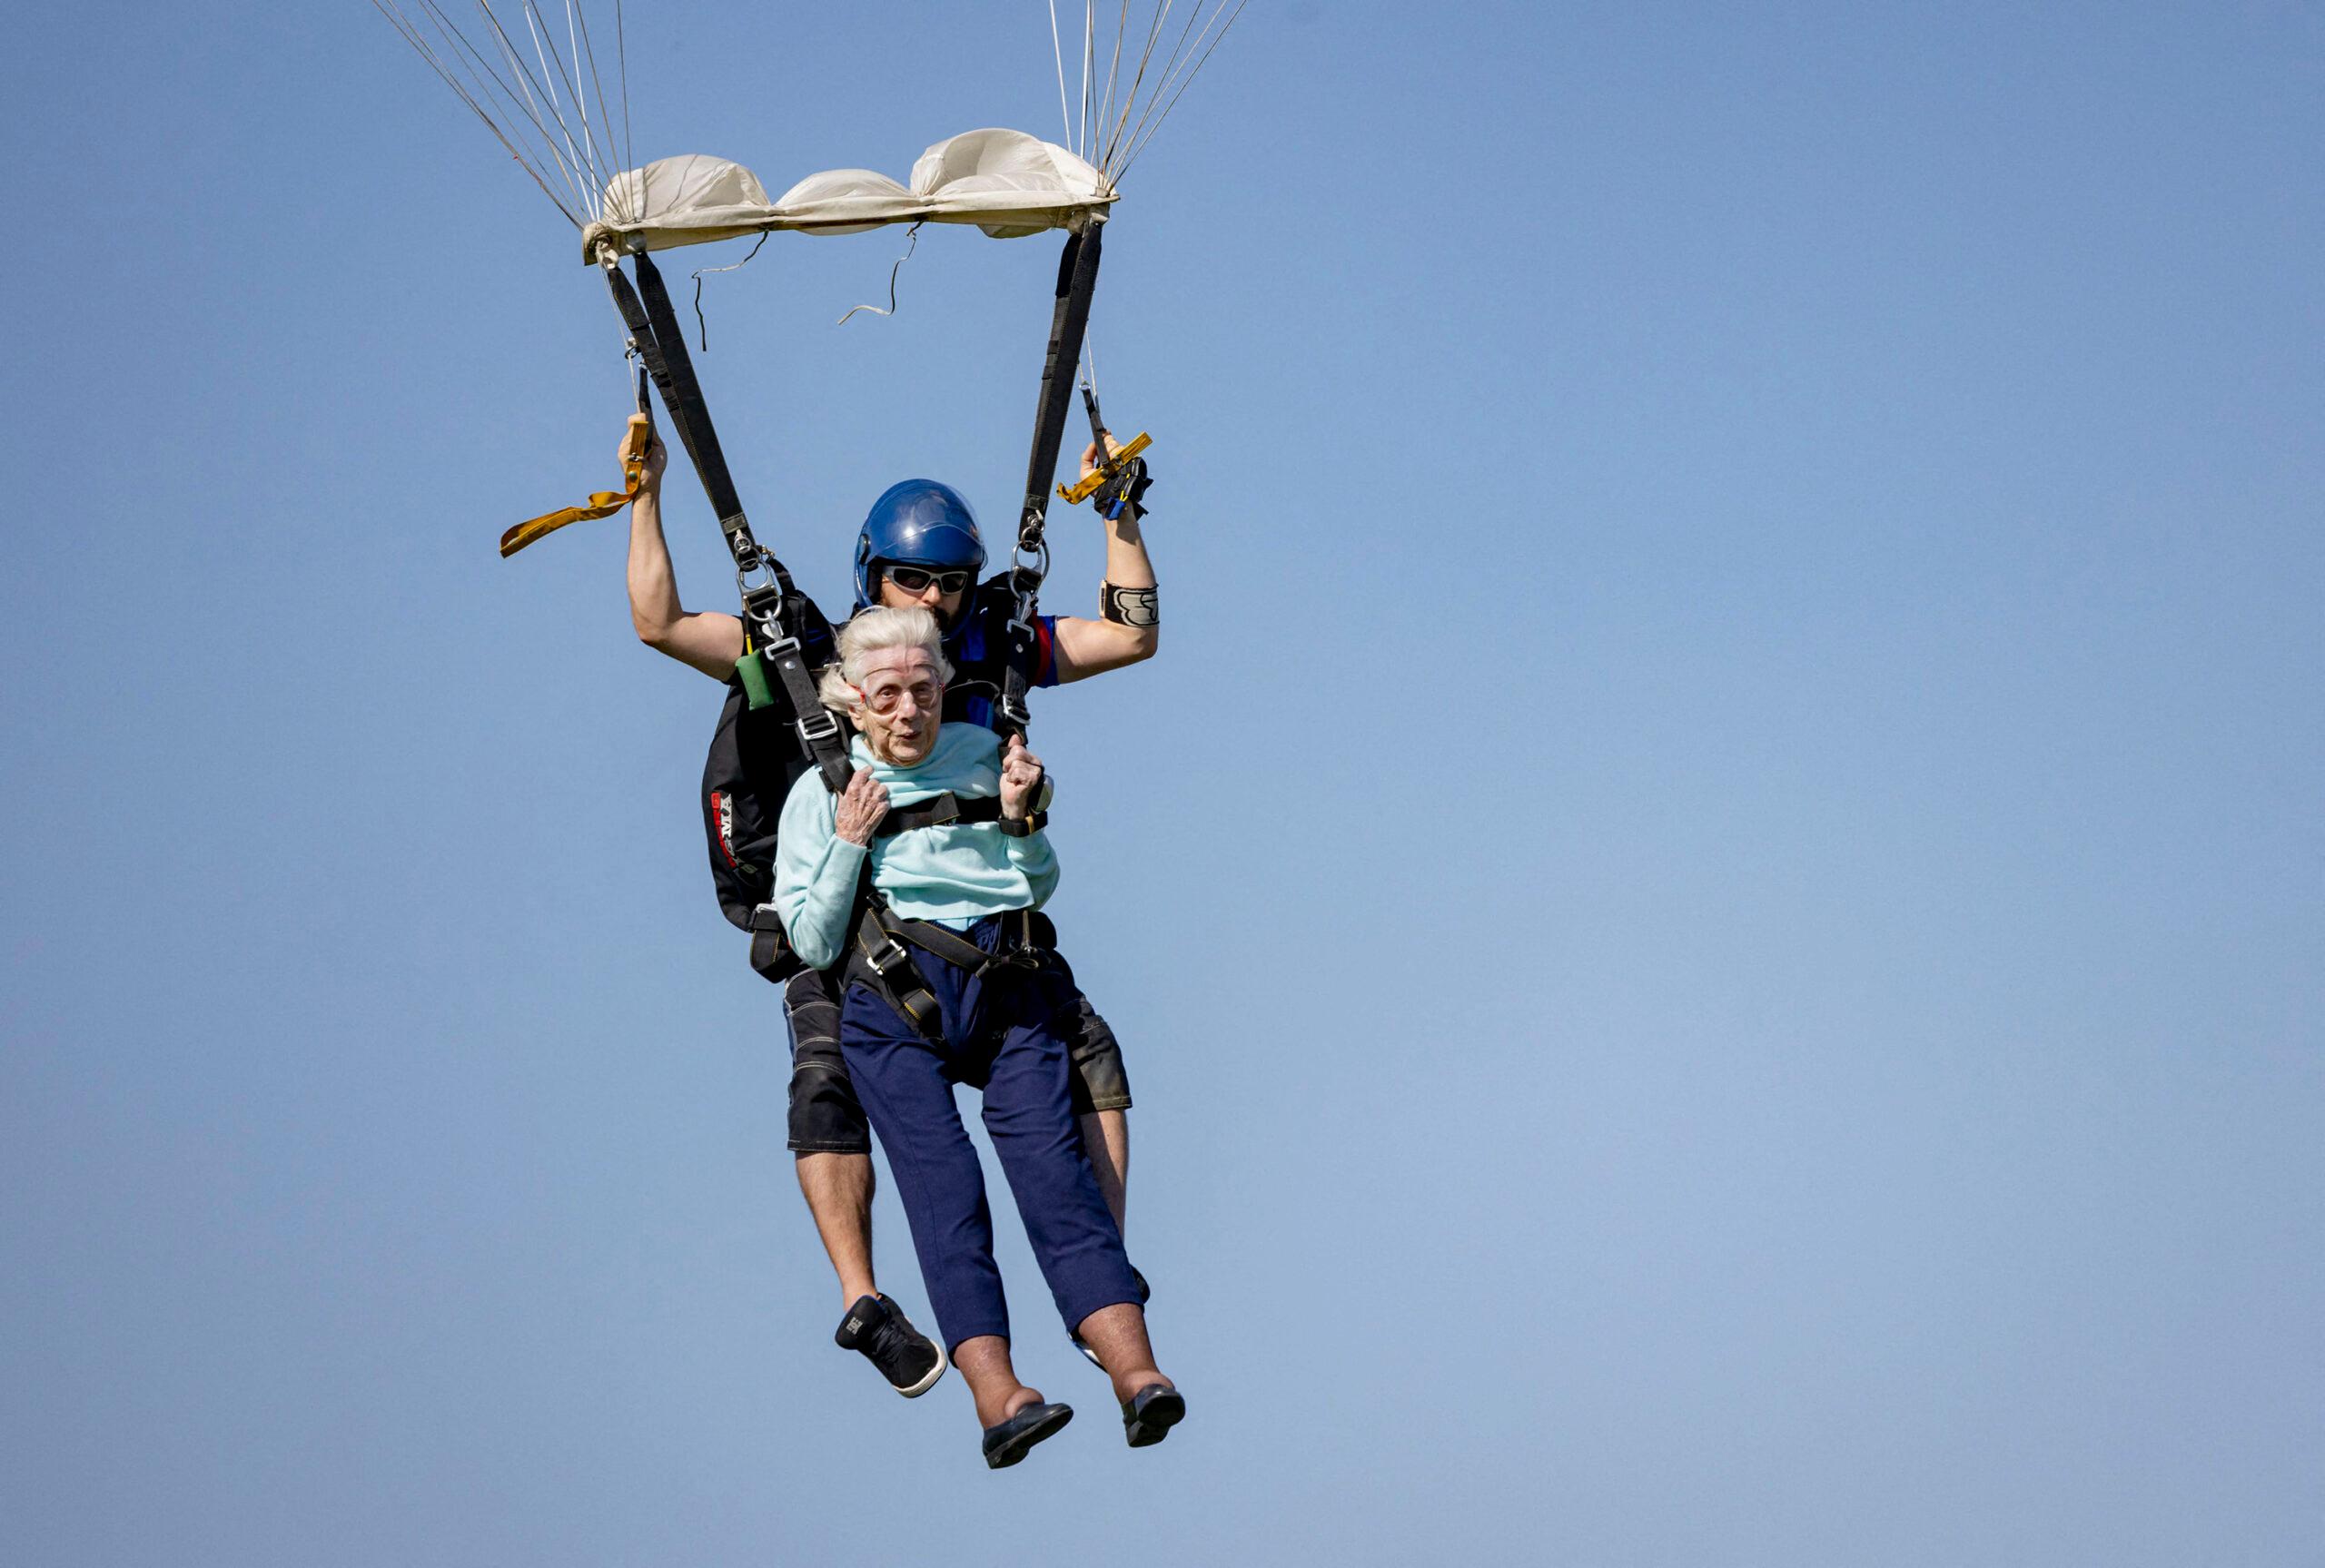 Dorothy Hoffner, 104, becomes the oldest person in the world to sky-dive on Oct. 1, 2023, at Skydive Chicago in Ottawa, Illinois